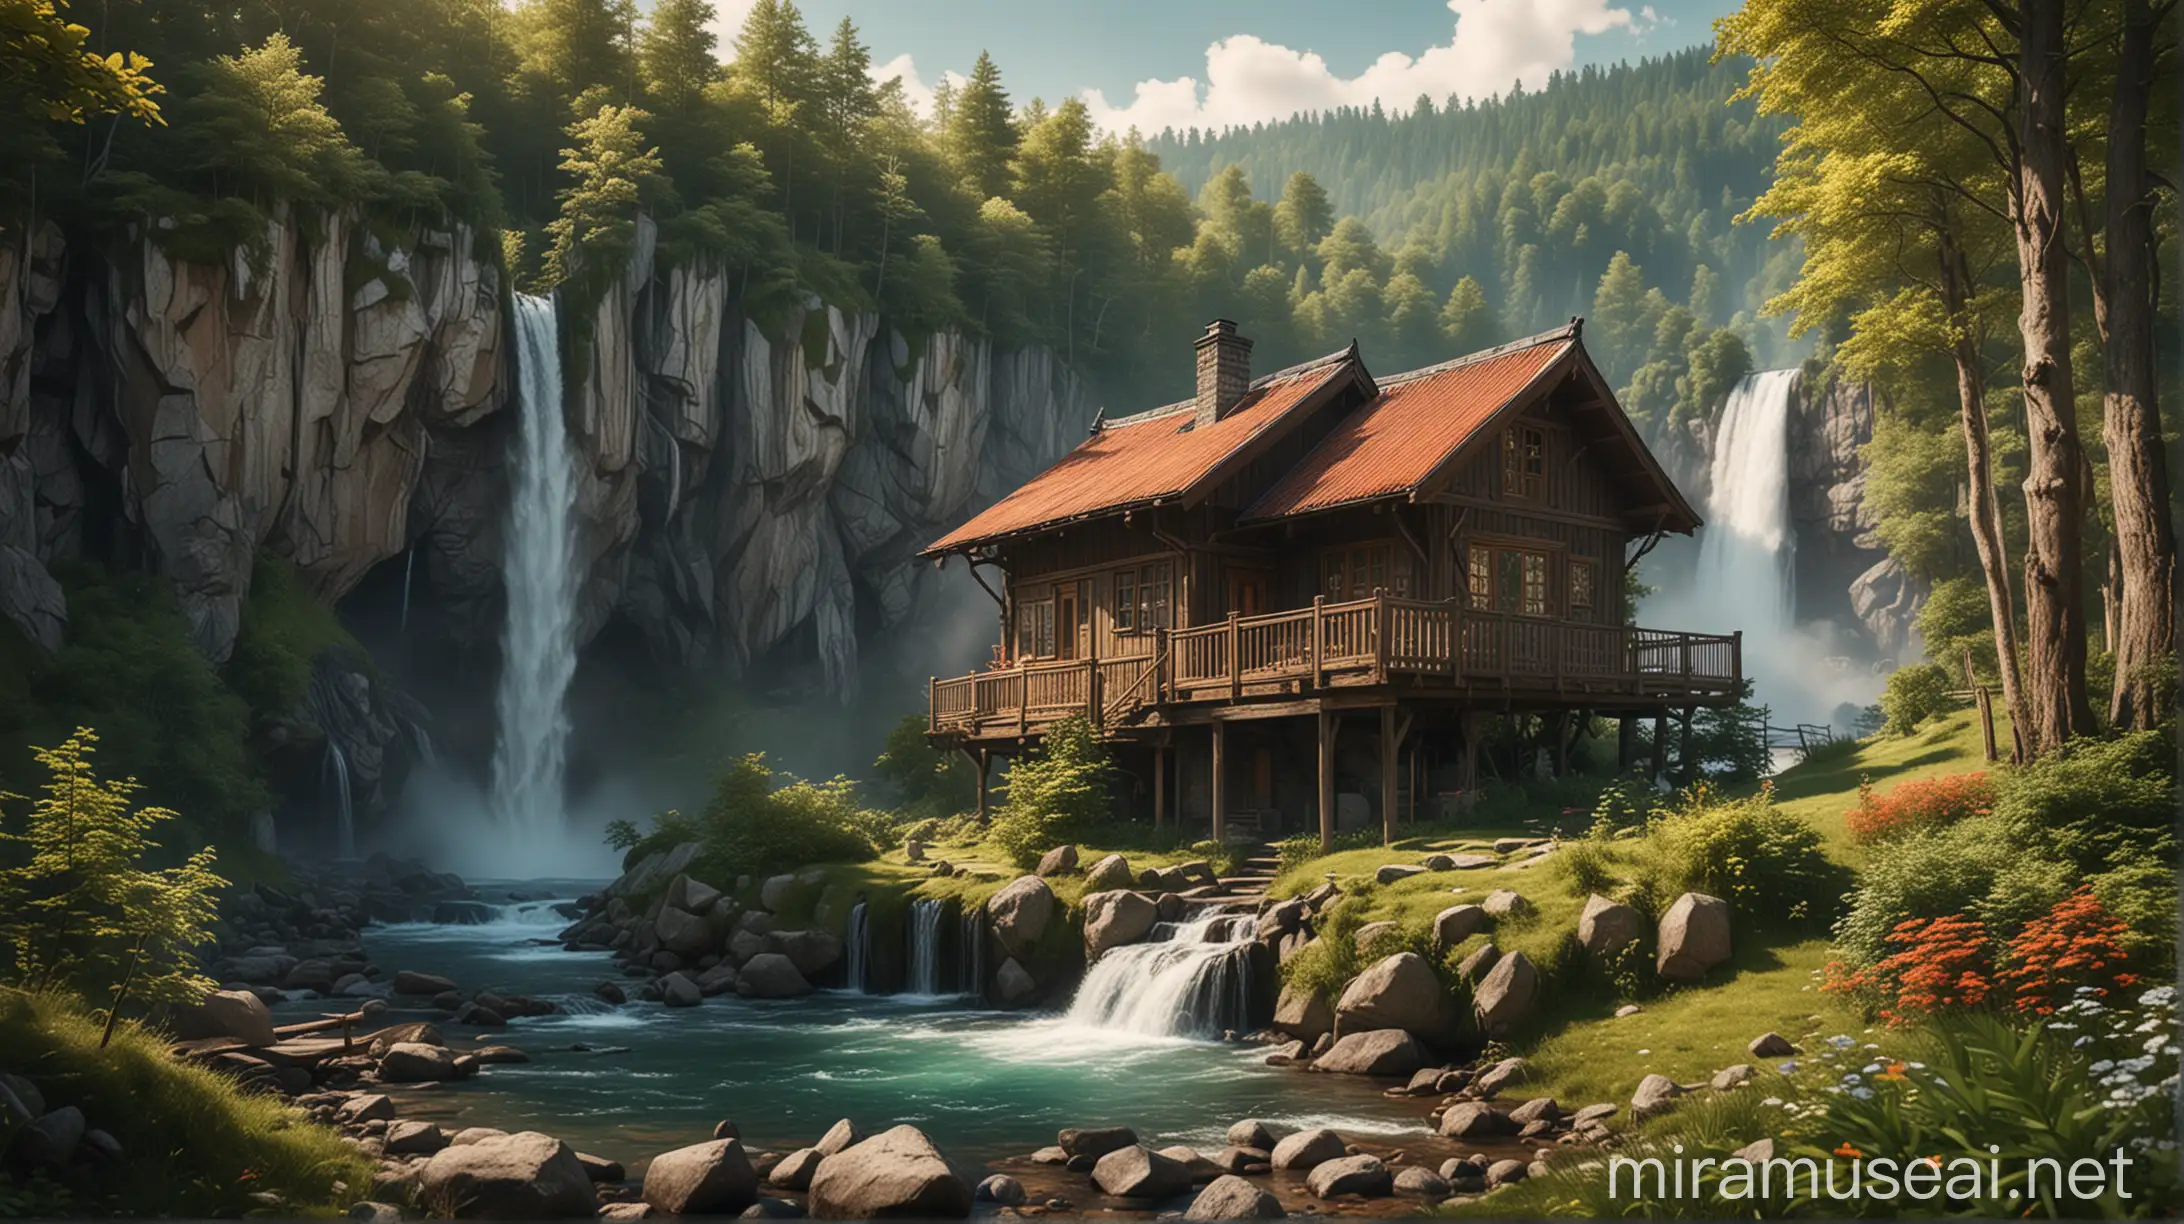 Enchanting Wood Cottage by Majestic Waterfall in Vibrant UltraHD